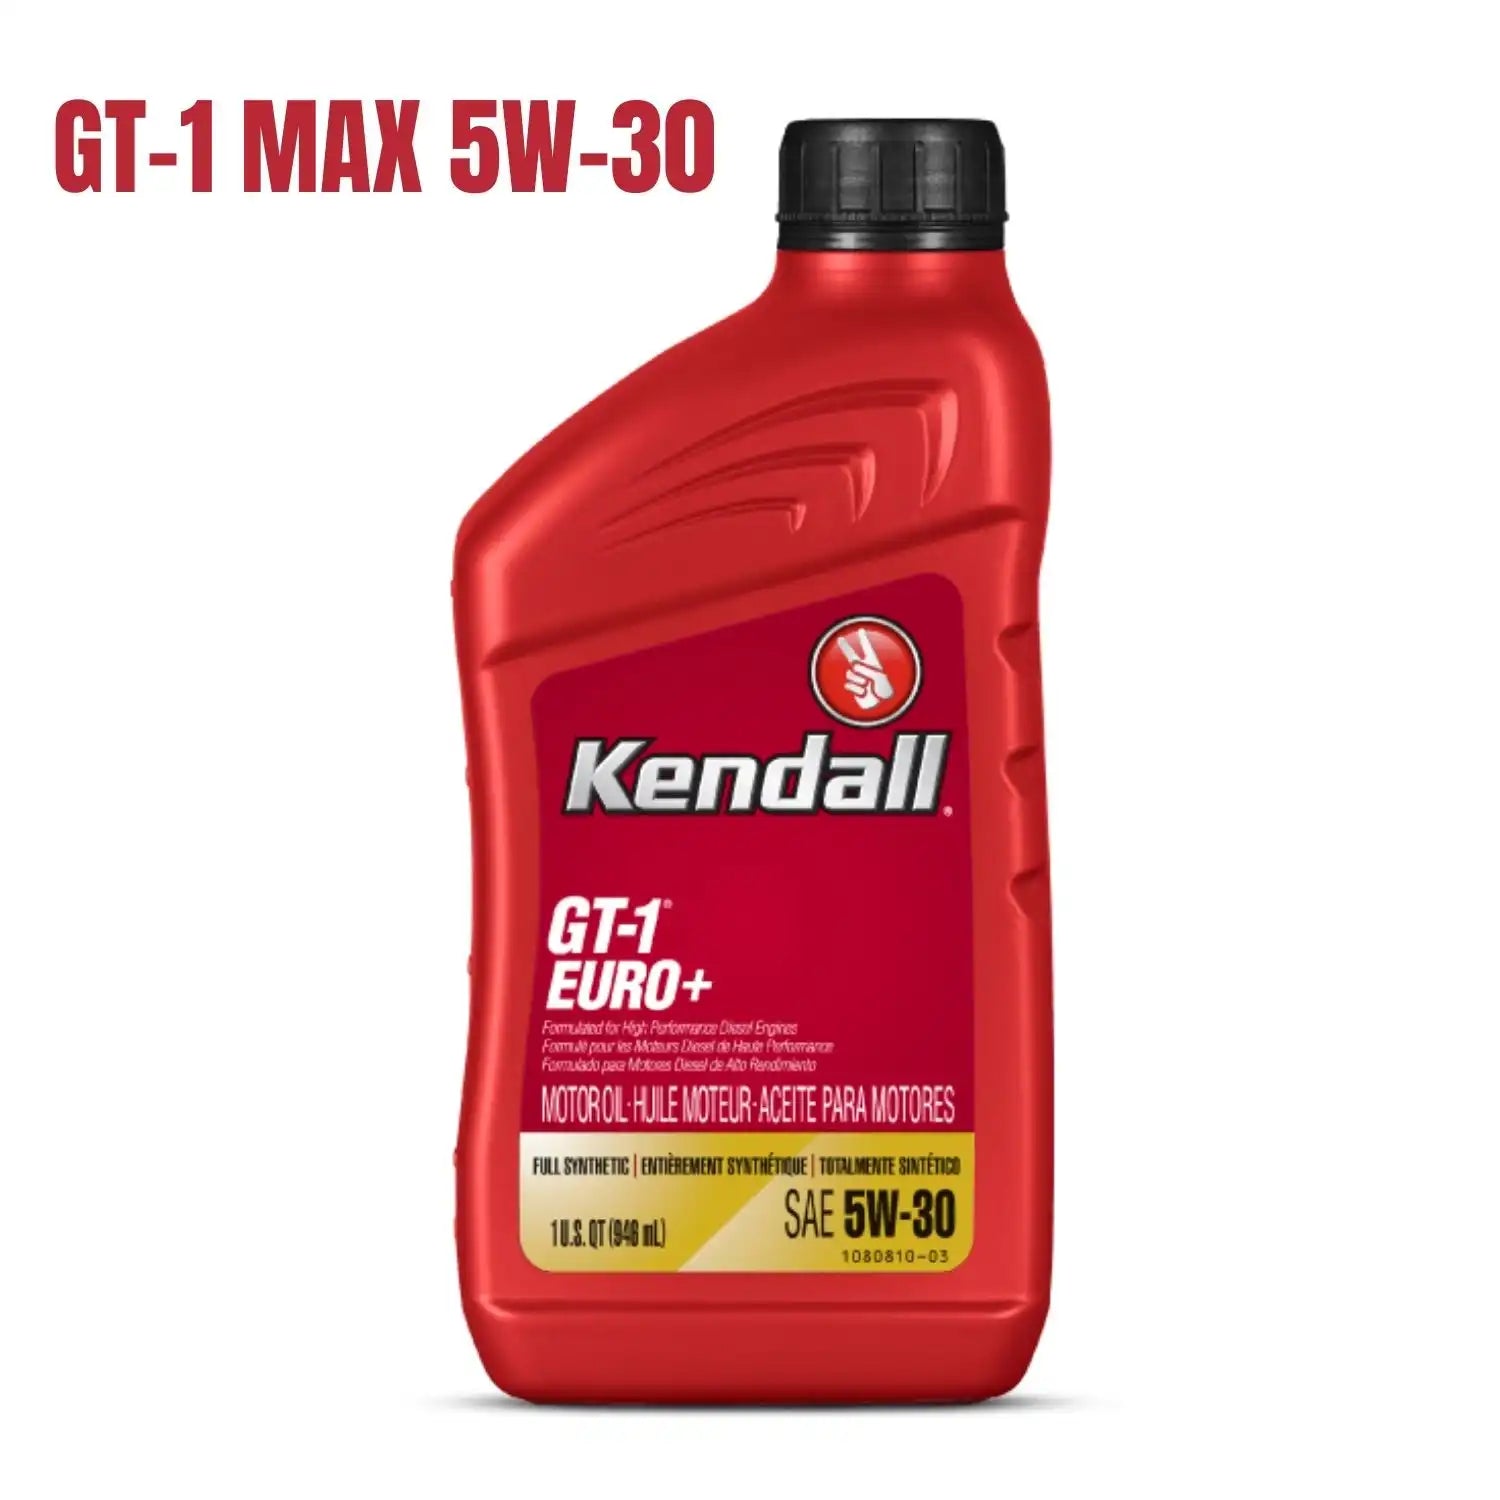 Kendall GT-1 MAX 5W-30  Full-Synthetic Car Engine Oil 1 Liter